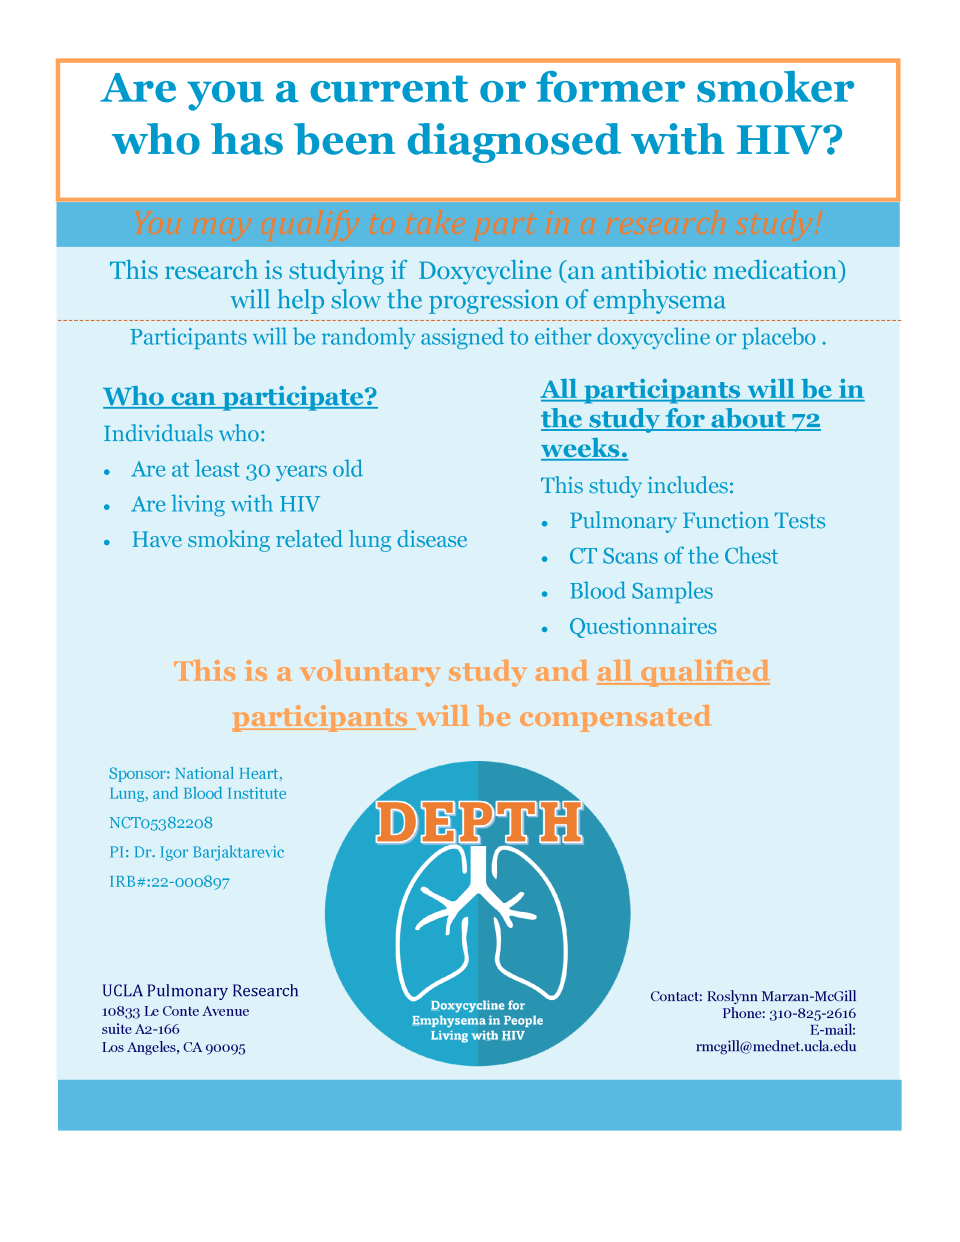 Are you a current or former smoker who has been diagnosed with HIV? You may qualify to take part in a research study! This research is studying if Doxycycline (an antibiotic medication) will help slow the progression of emphysema. Participants will be randomly assigned to either doxycycline or placebo. Who can participate? Individuals who are at least 30 years old; are living with HIV; and Have smoking related lung disease. All participants will be in the study for about 72 weeks. This study includes: Pulmo